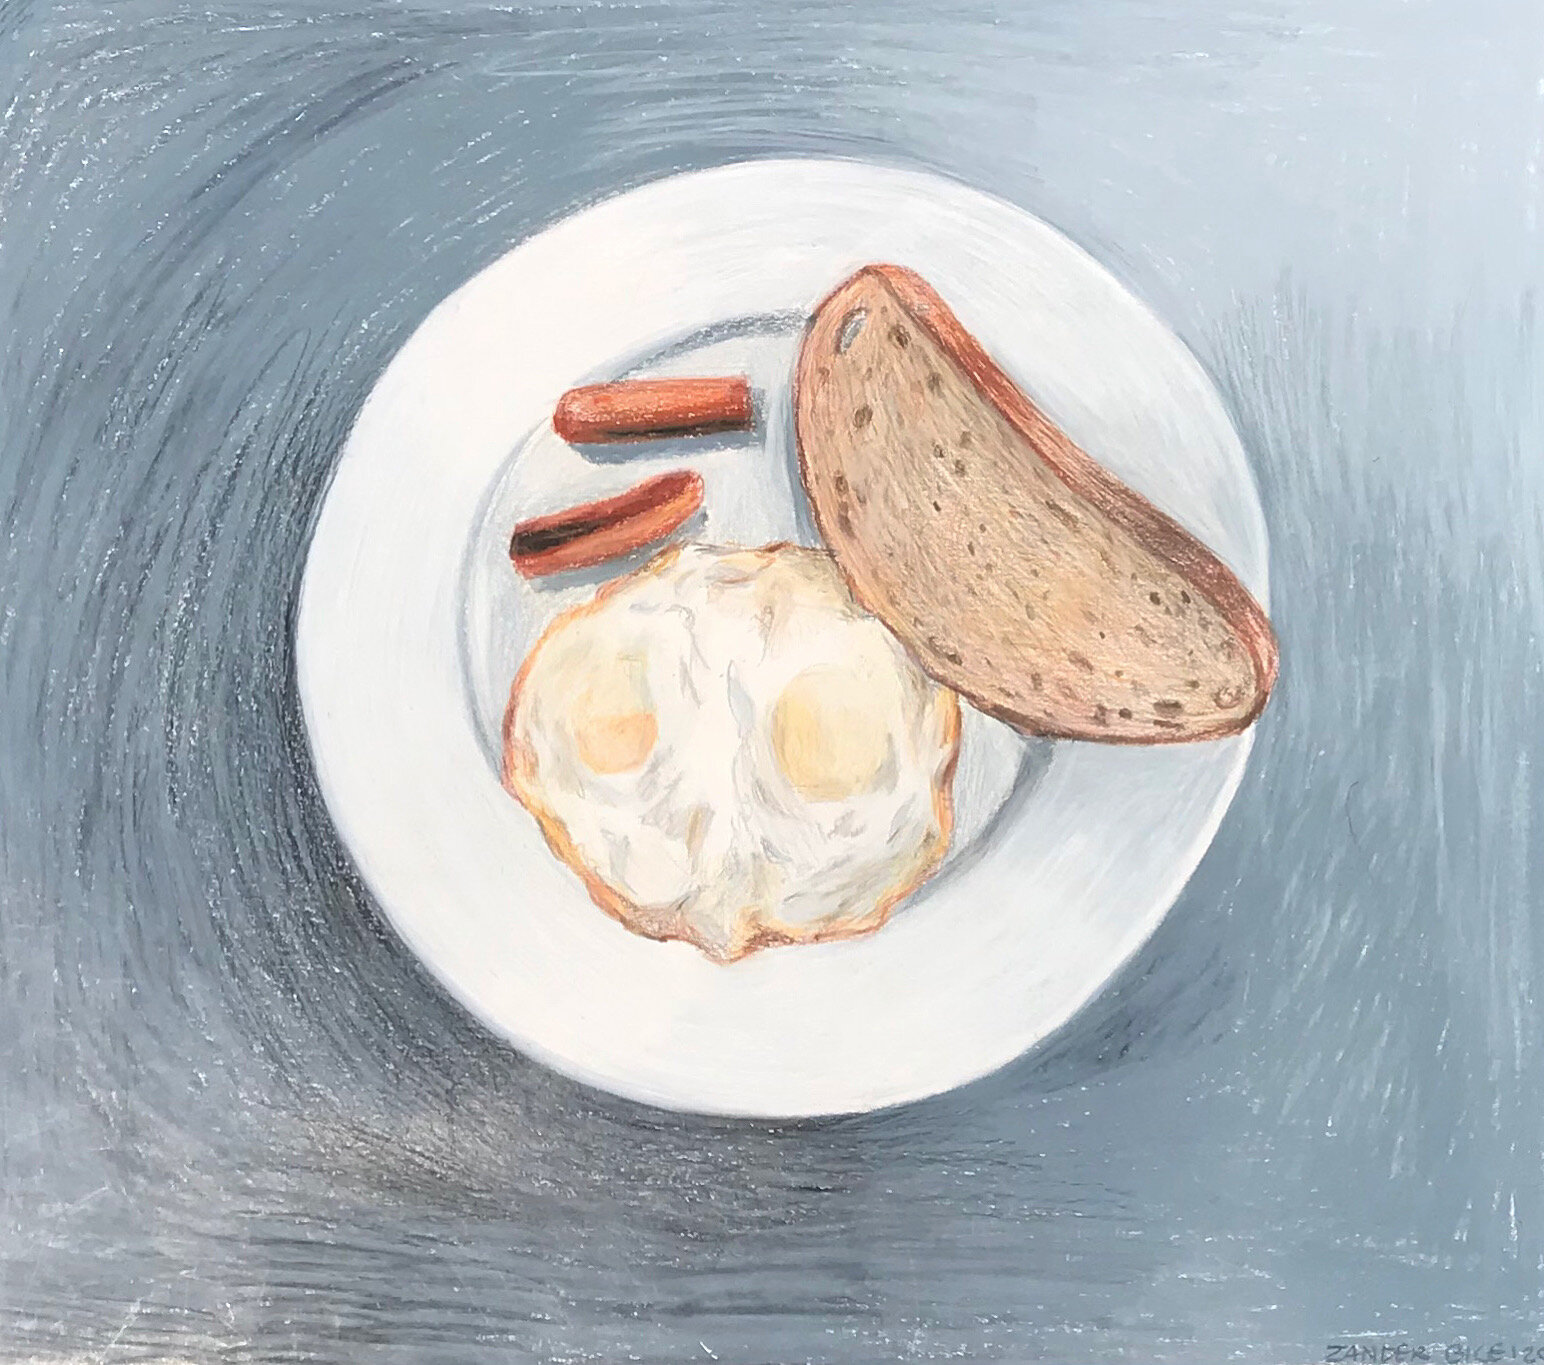 Egg and Sausage Breakfast - 14" x 11" - Wax Crayon on Paper - 2020 (*SOLD)